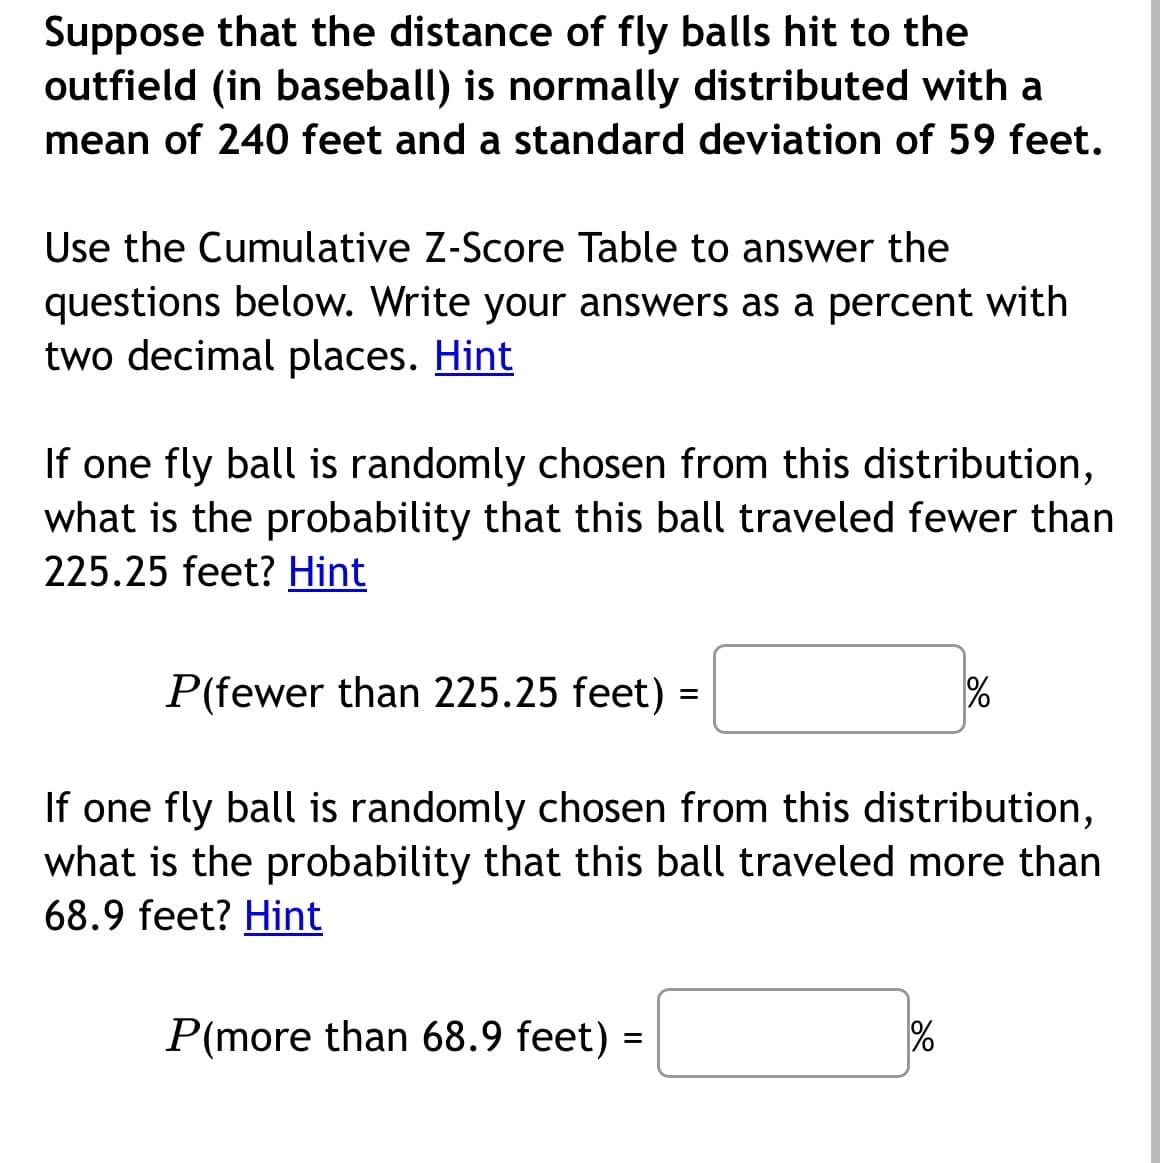 Suppose that the distance of fly balls hit to the
outfield (in baseball) is normally distributed with a
mean of 240 feet and a standard deviation of 59 feet.
Use the Cumulative Z-Score Table to answer the
questions below. Write your answers as a percent with
two decimal places. Hint
If one fly ball is randomly chosen from this distribution,
what is the probability that this ball traveled fewer than
225.25 feet? Hint
P(fewer than 225.25 feet) =
If one fly ball is randomly chosen from this distribution,
what is the probability that this ball traveled more than
68.9 feet? Hint
P(more than 68.9 feet) =
%
%